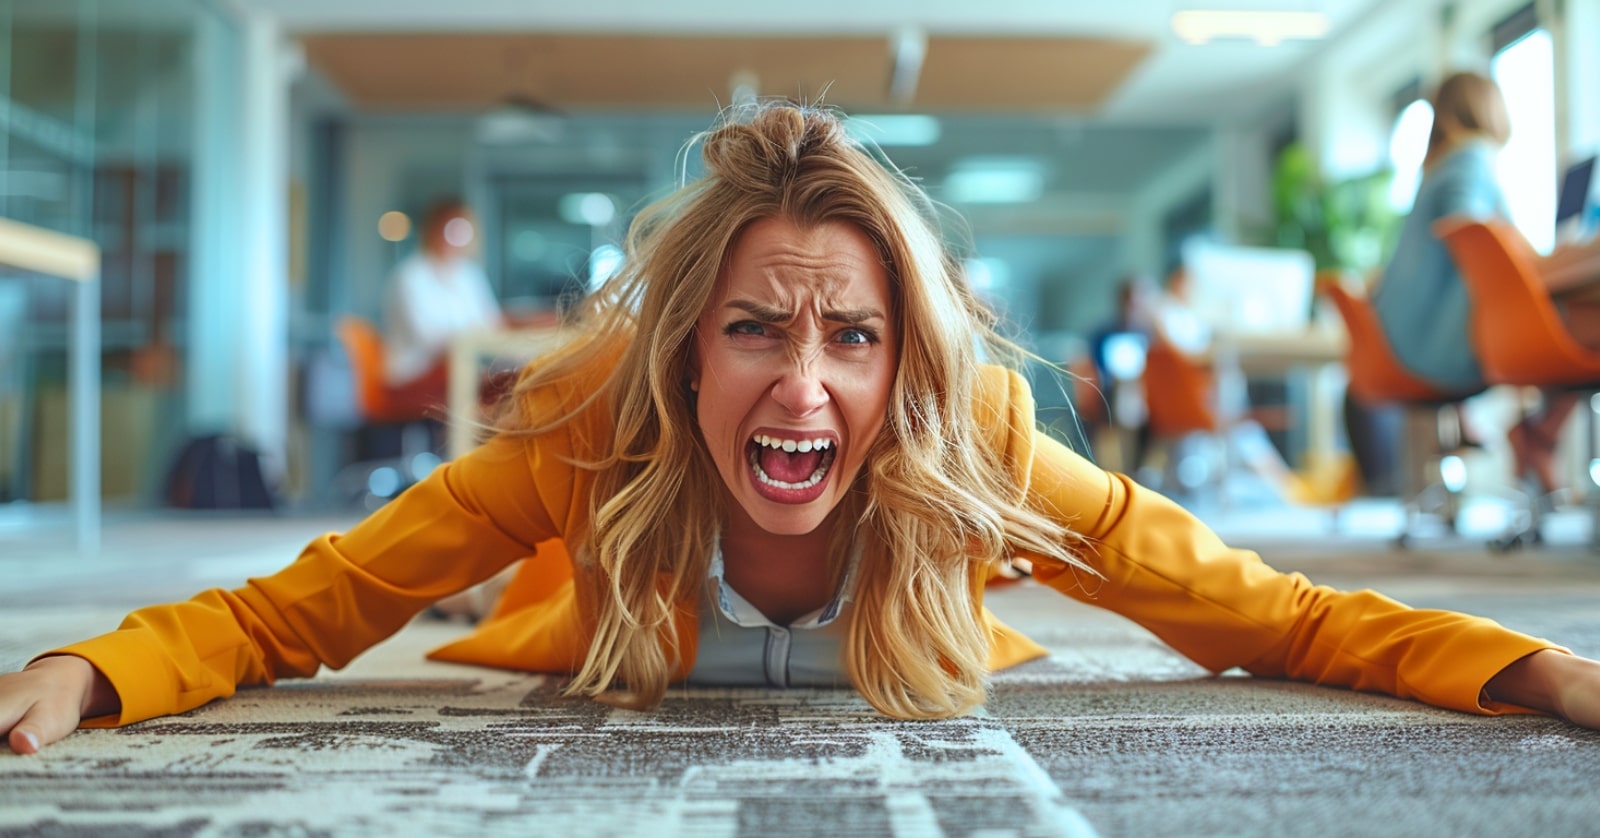 a woman in an orange suit jacket having a tantrum on the floor of a bright office while her colleagues work in the background